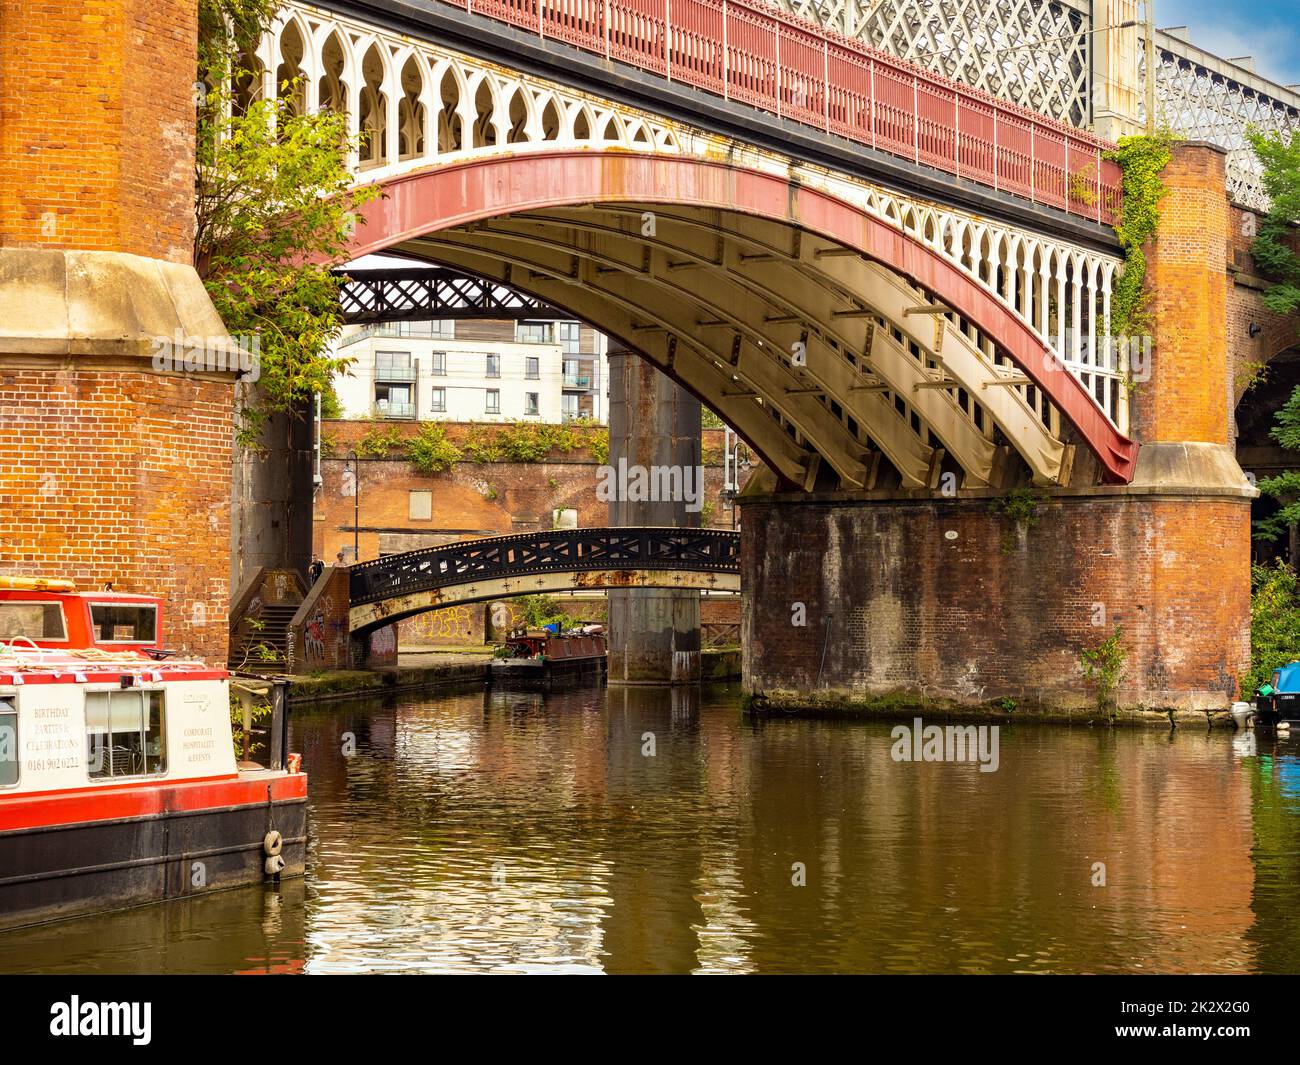 Brigewater viaduct spanning the Bridgewater canal in the Castlefield area of Manchester. Stock Photo